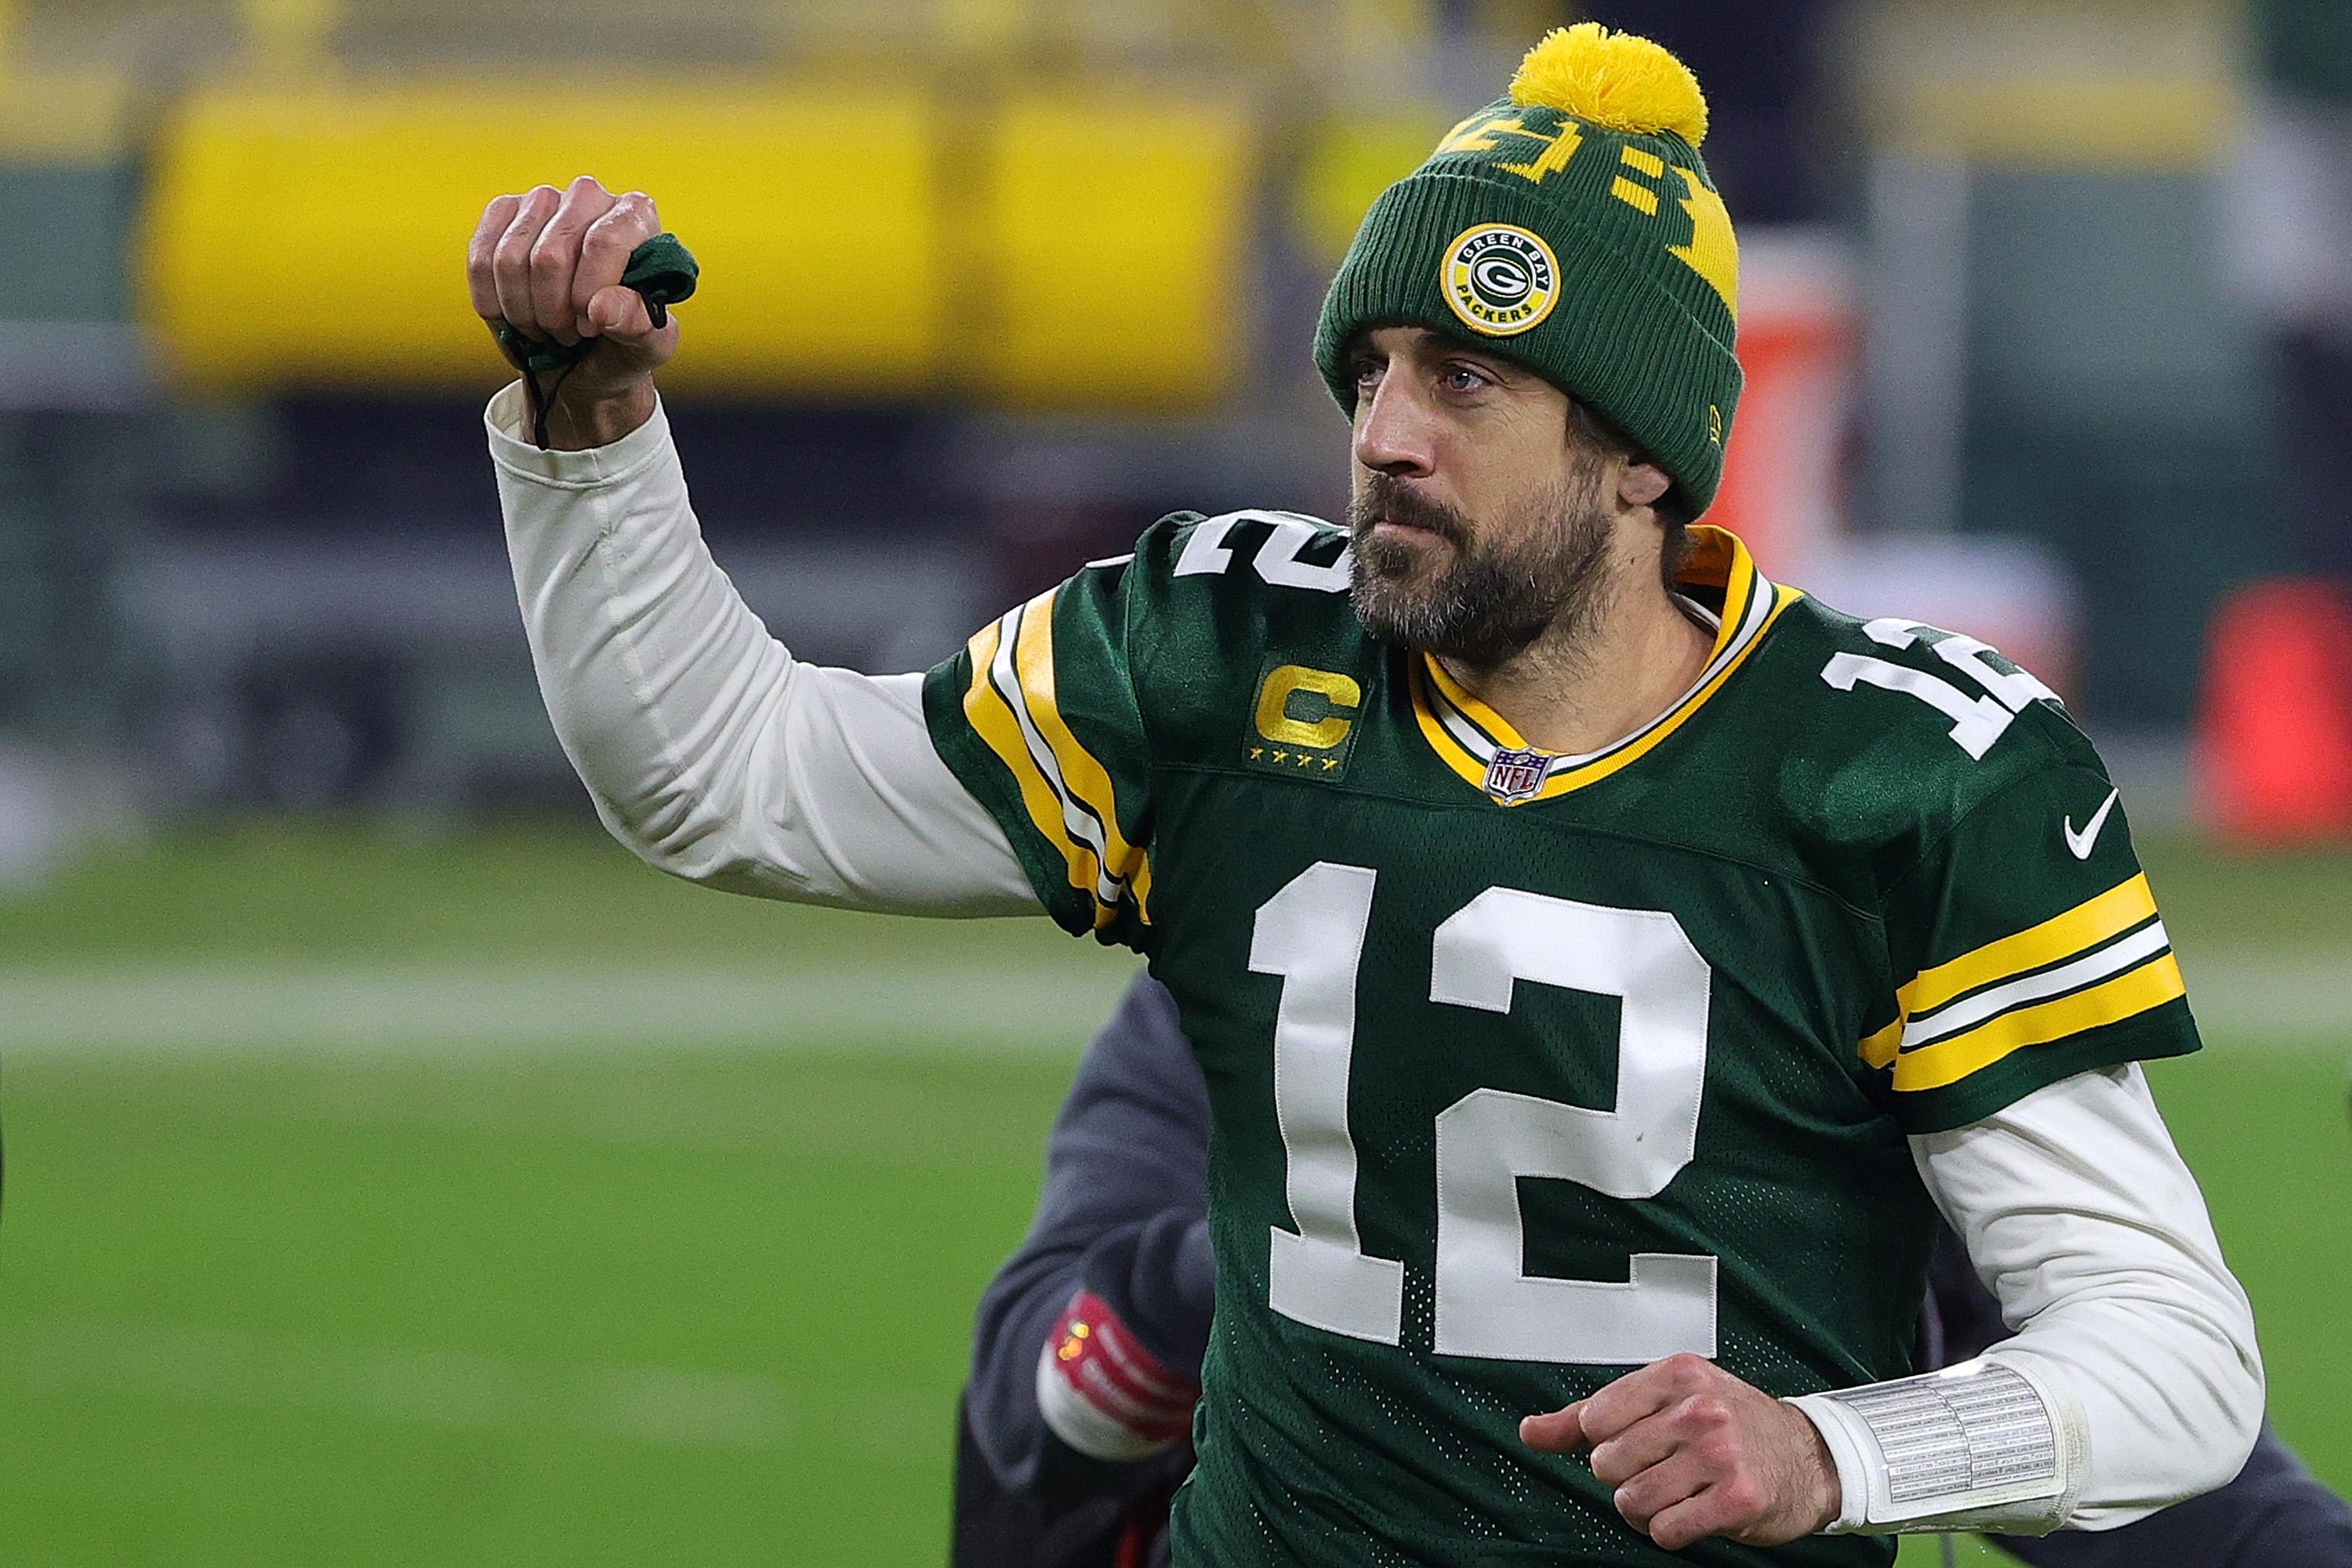 Aaron Rodgers puts his fist in the air as he leaves the field following the Packers' playoff game against the Los Angeles Rams at Lambeau Field on Jan. 16 in Green Bay, Wisconsin.